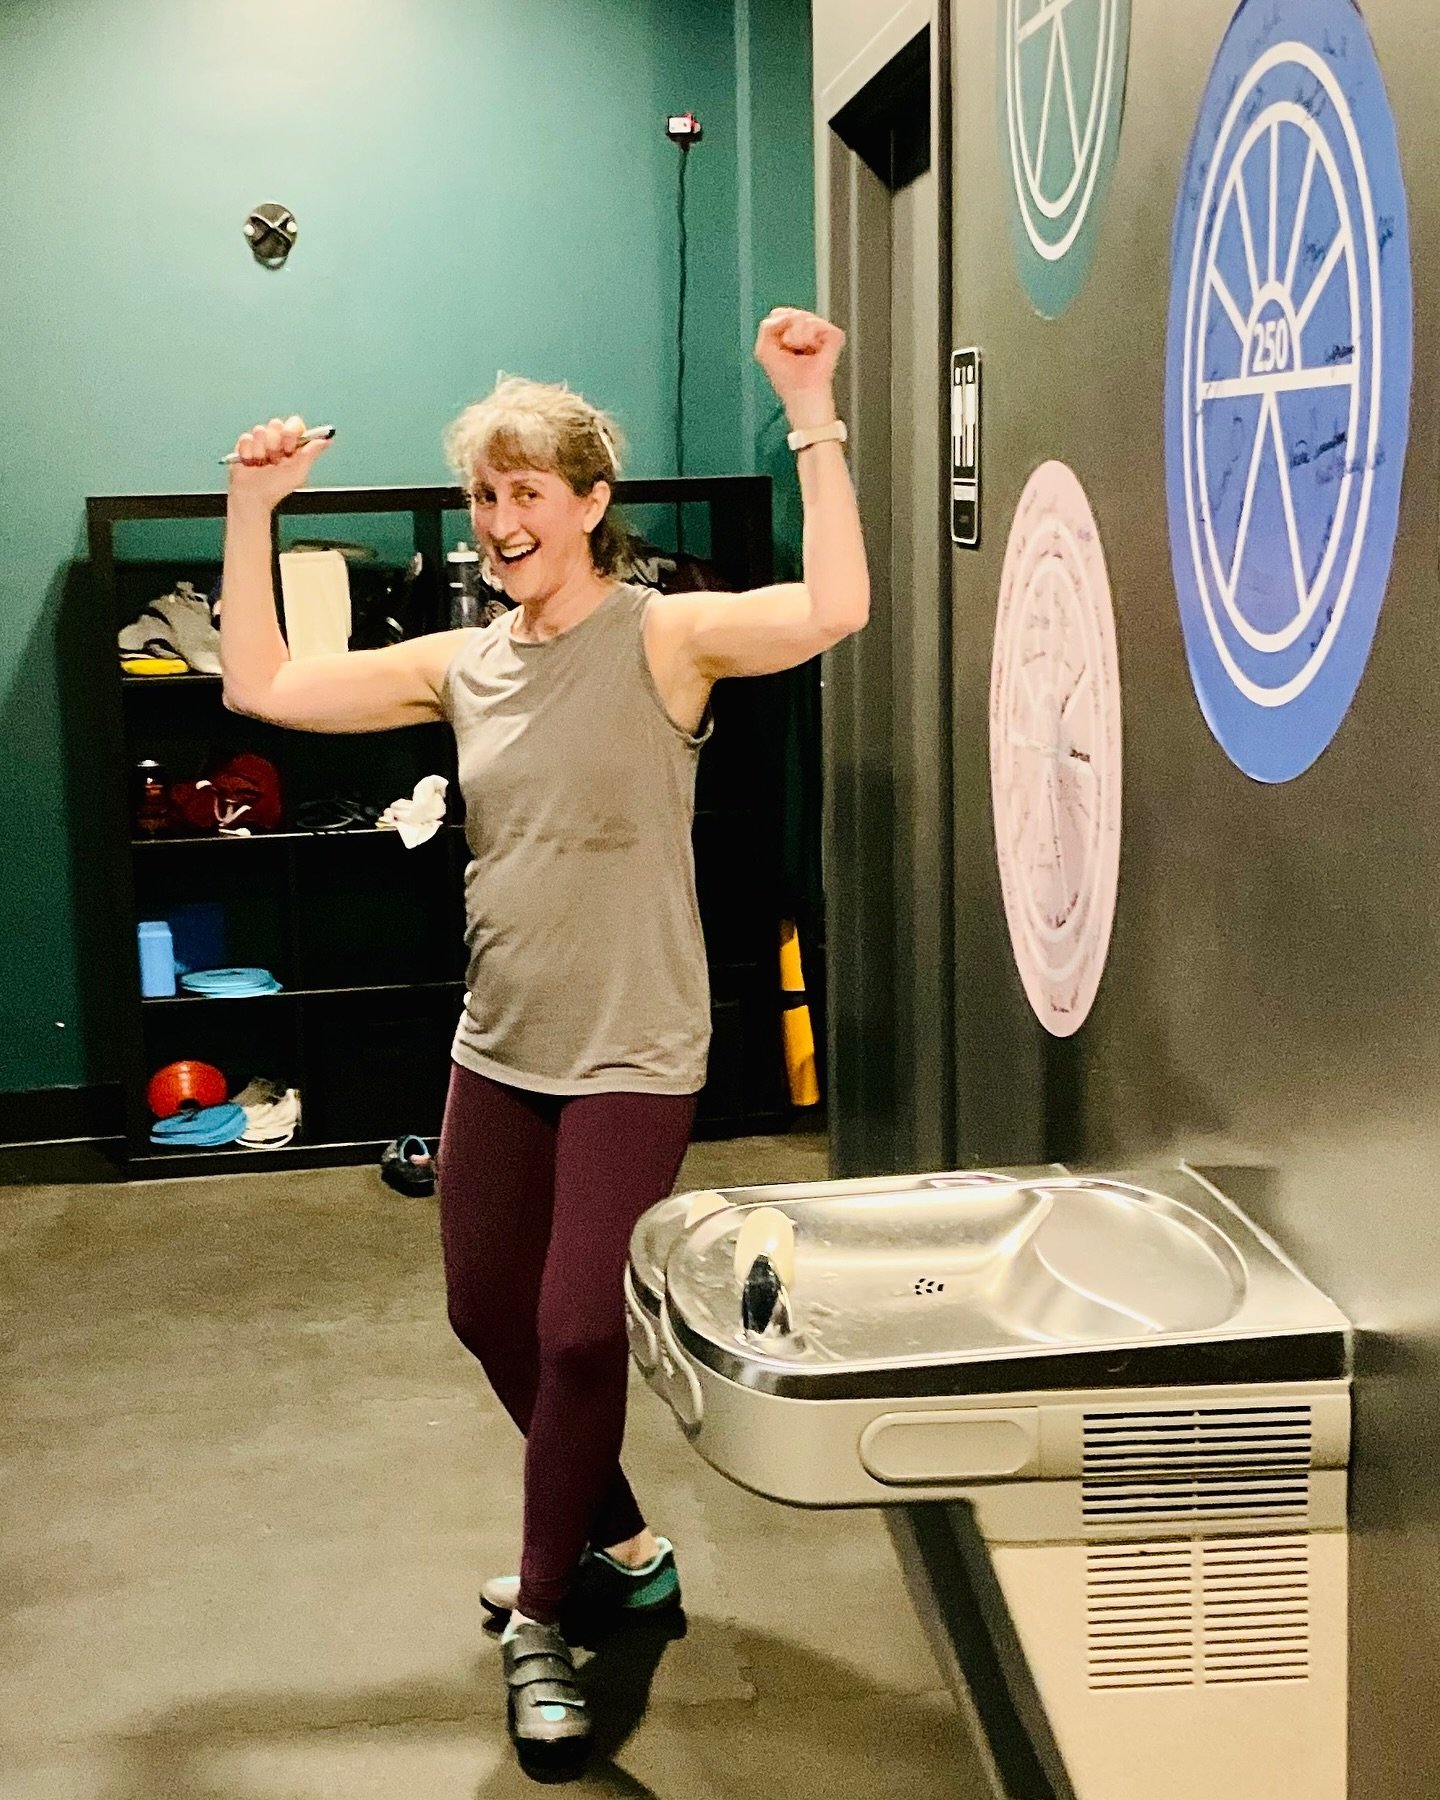 That feeling when you hit 100 classes&hellip;way to go Joyce!! Joyce has one of those &ldquo;don&rsquo;t mess with me&rdquo; faces when she&rsquo;s crushing miles on the bike and we LOVE it!! You don&rsquo;t have to tell her to push - she does it aut